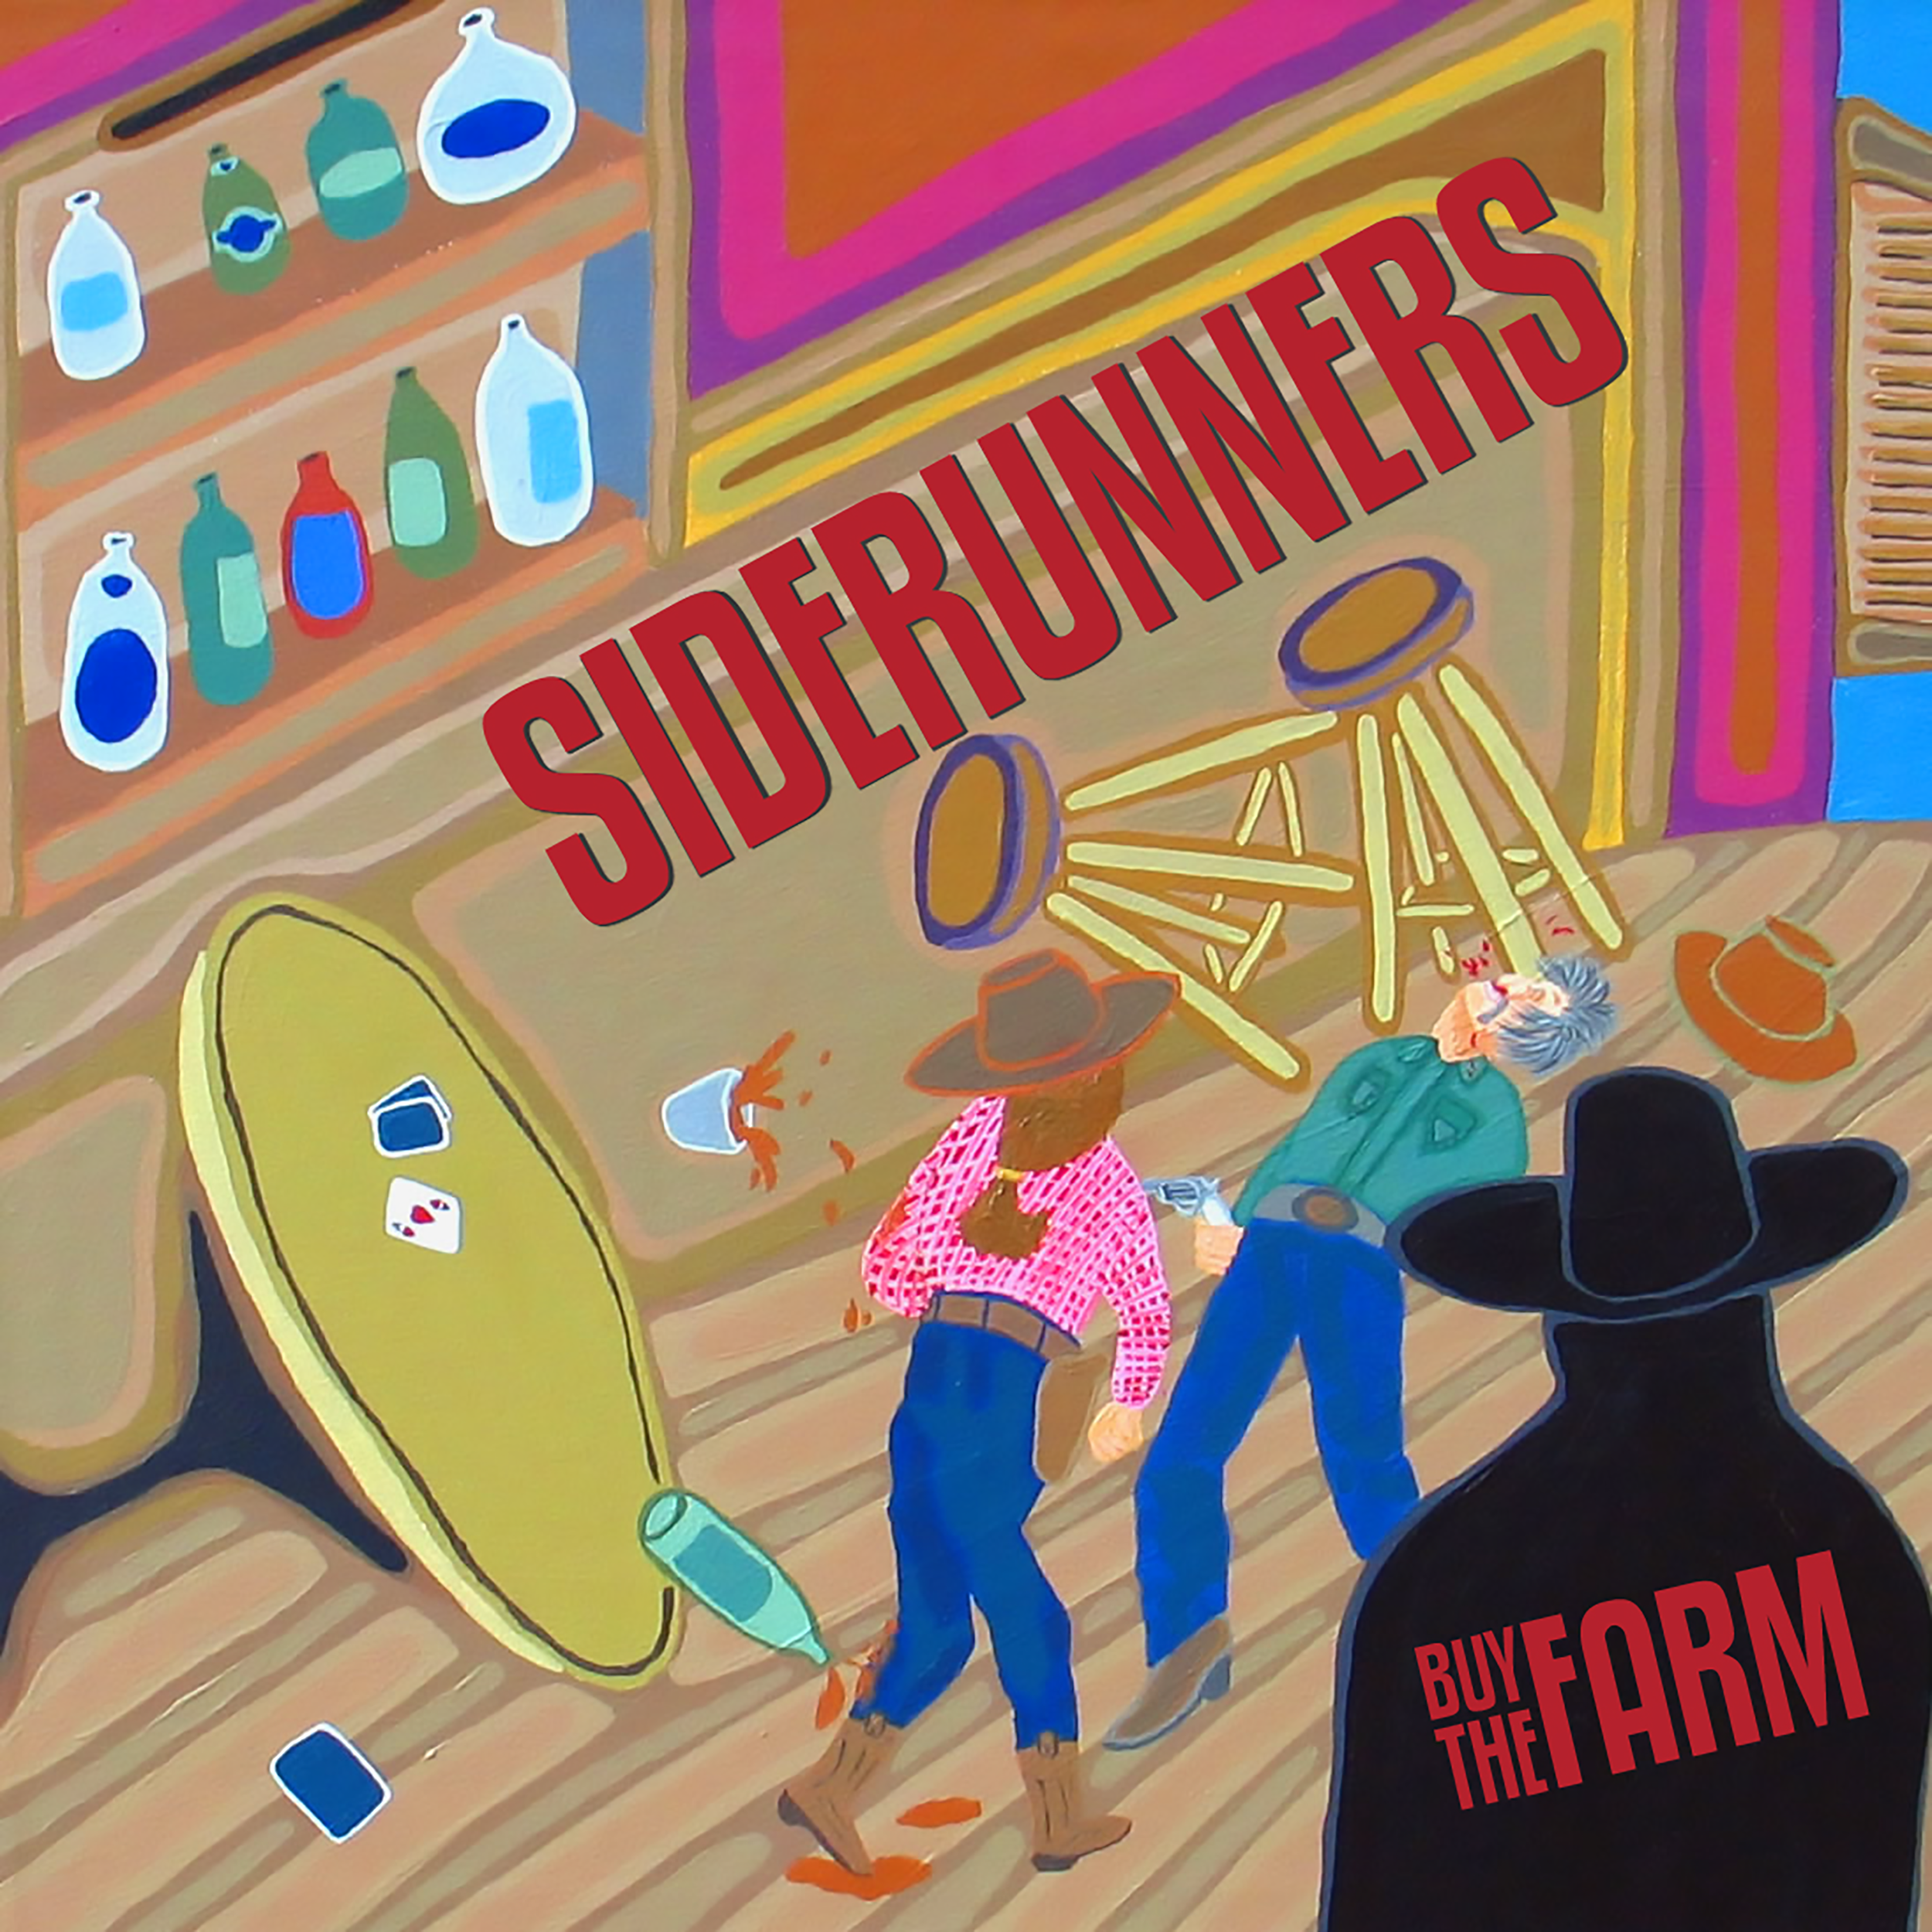 Siderunners - Buy The Farm